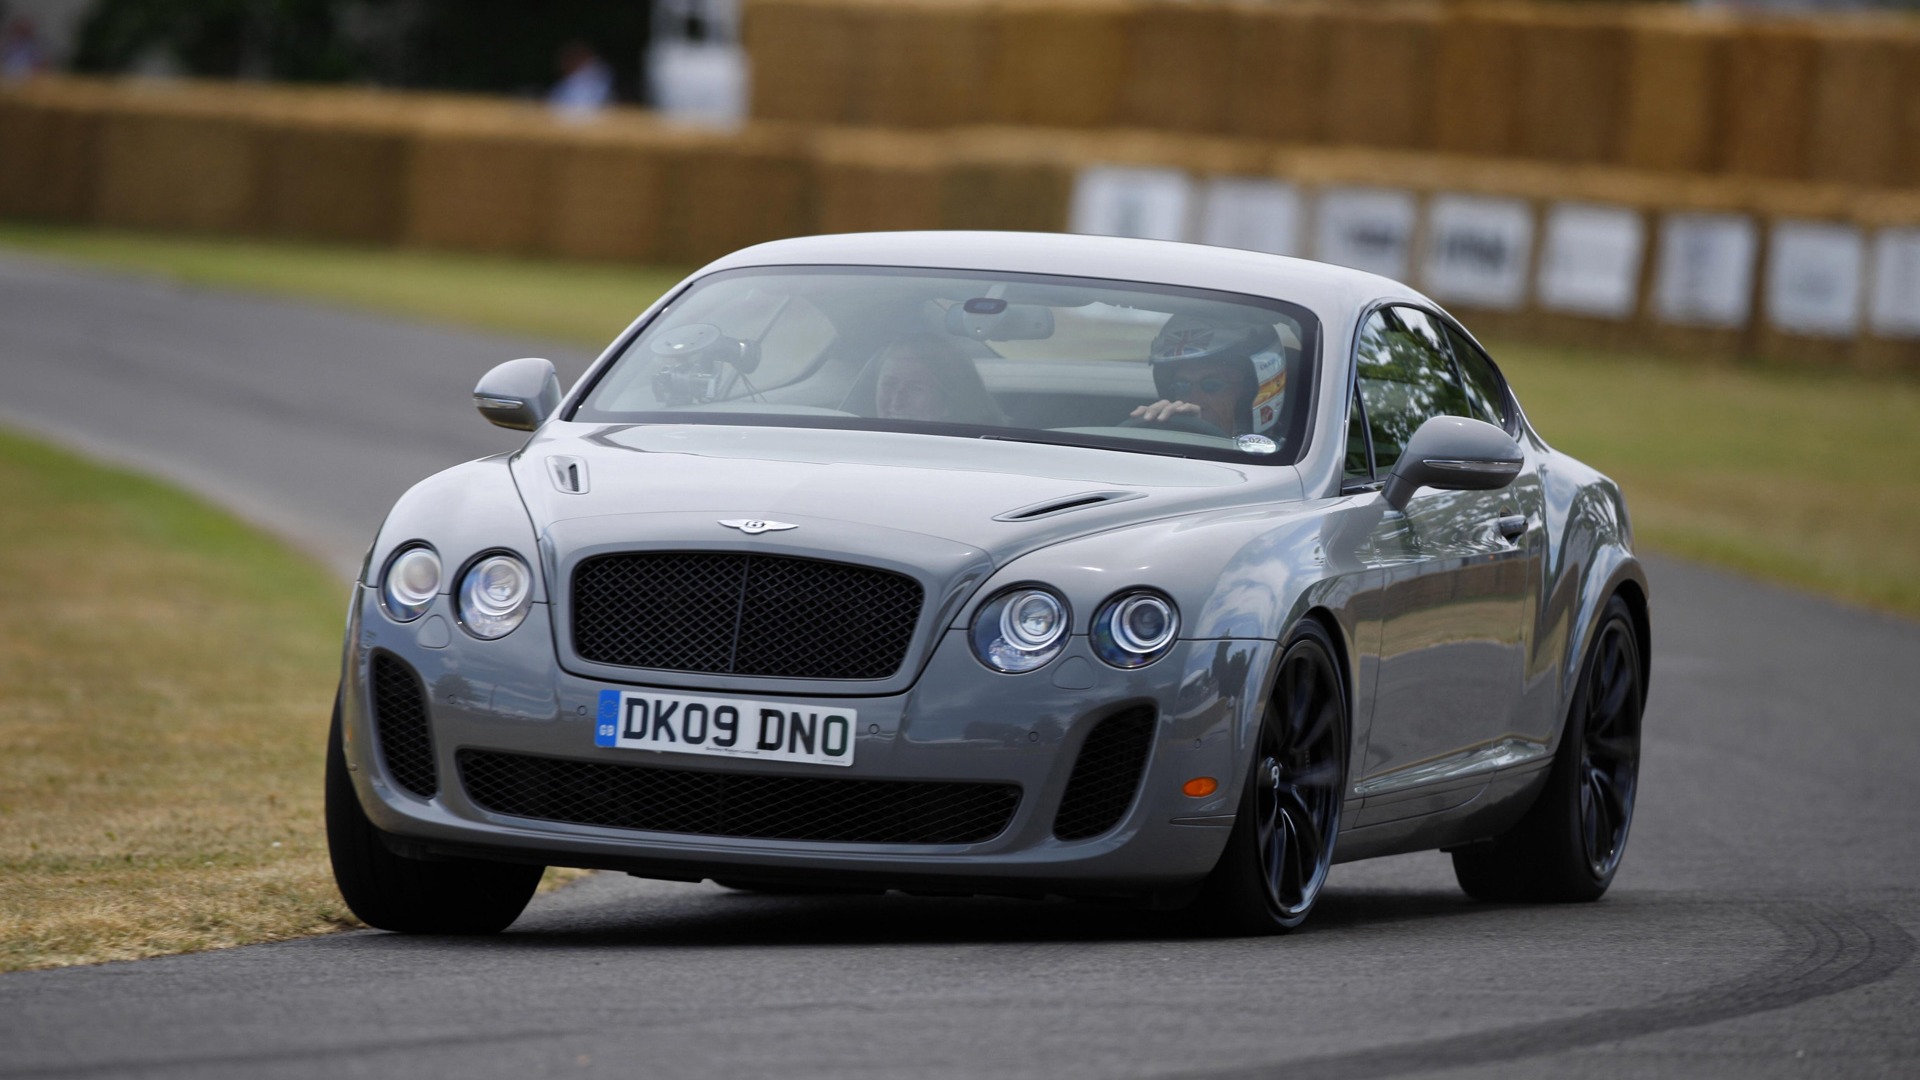 Bentley Continental Supersports - 2009 宾利11 - 1920x1080